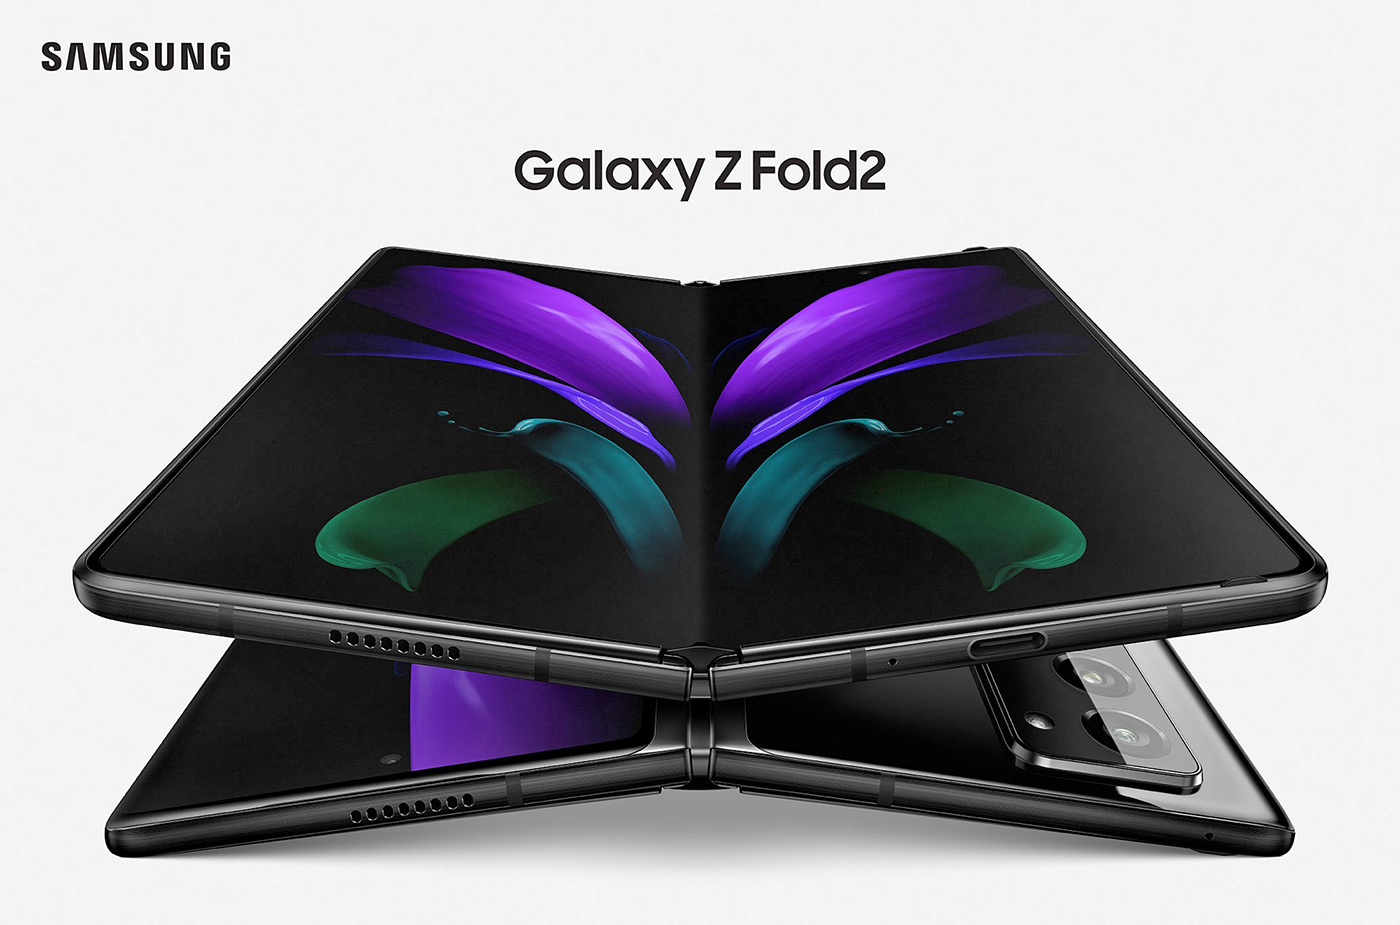 Galaxy Z Fold2 - maturing smartphone with a flexible screen, version number two